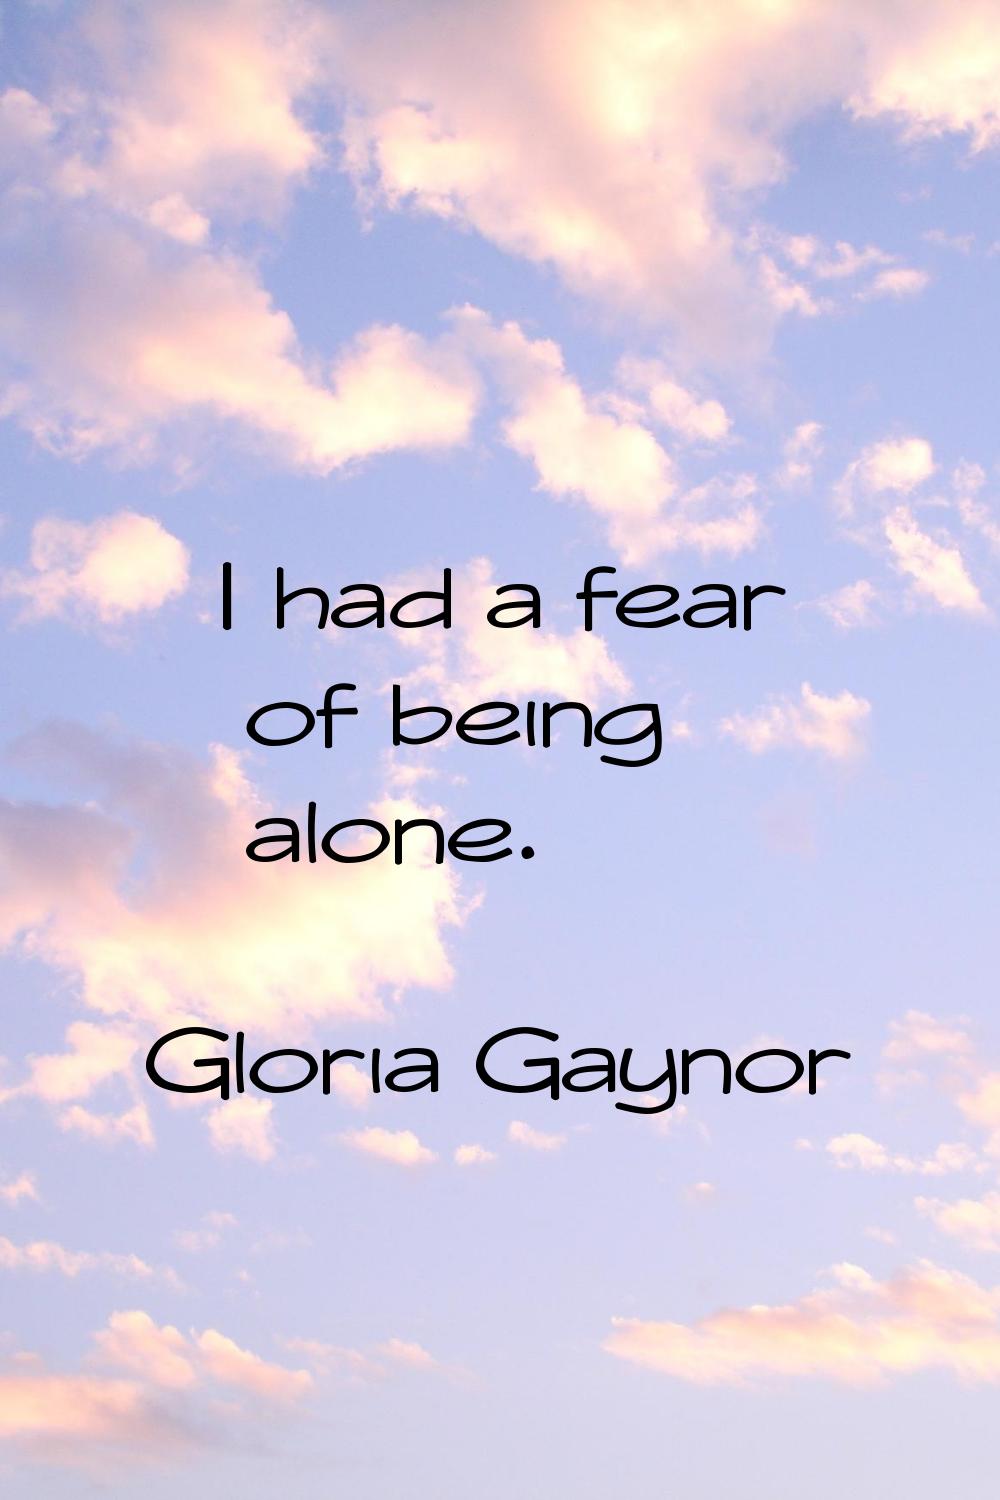 I had a fear of being alone.